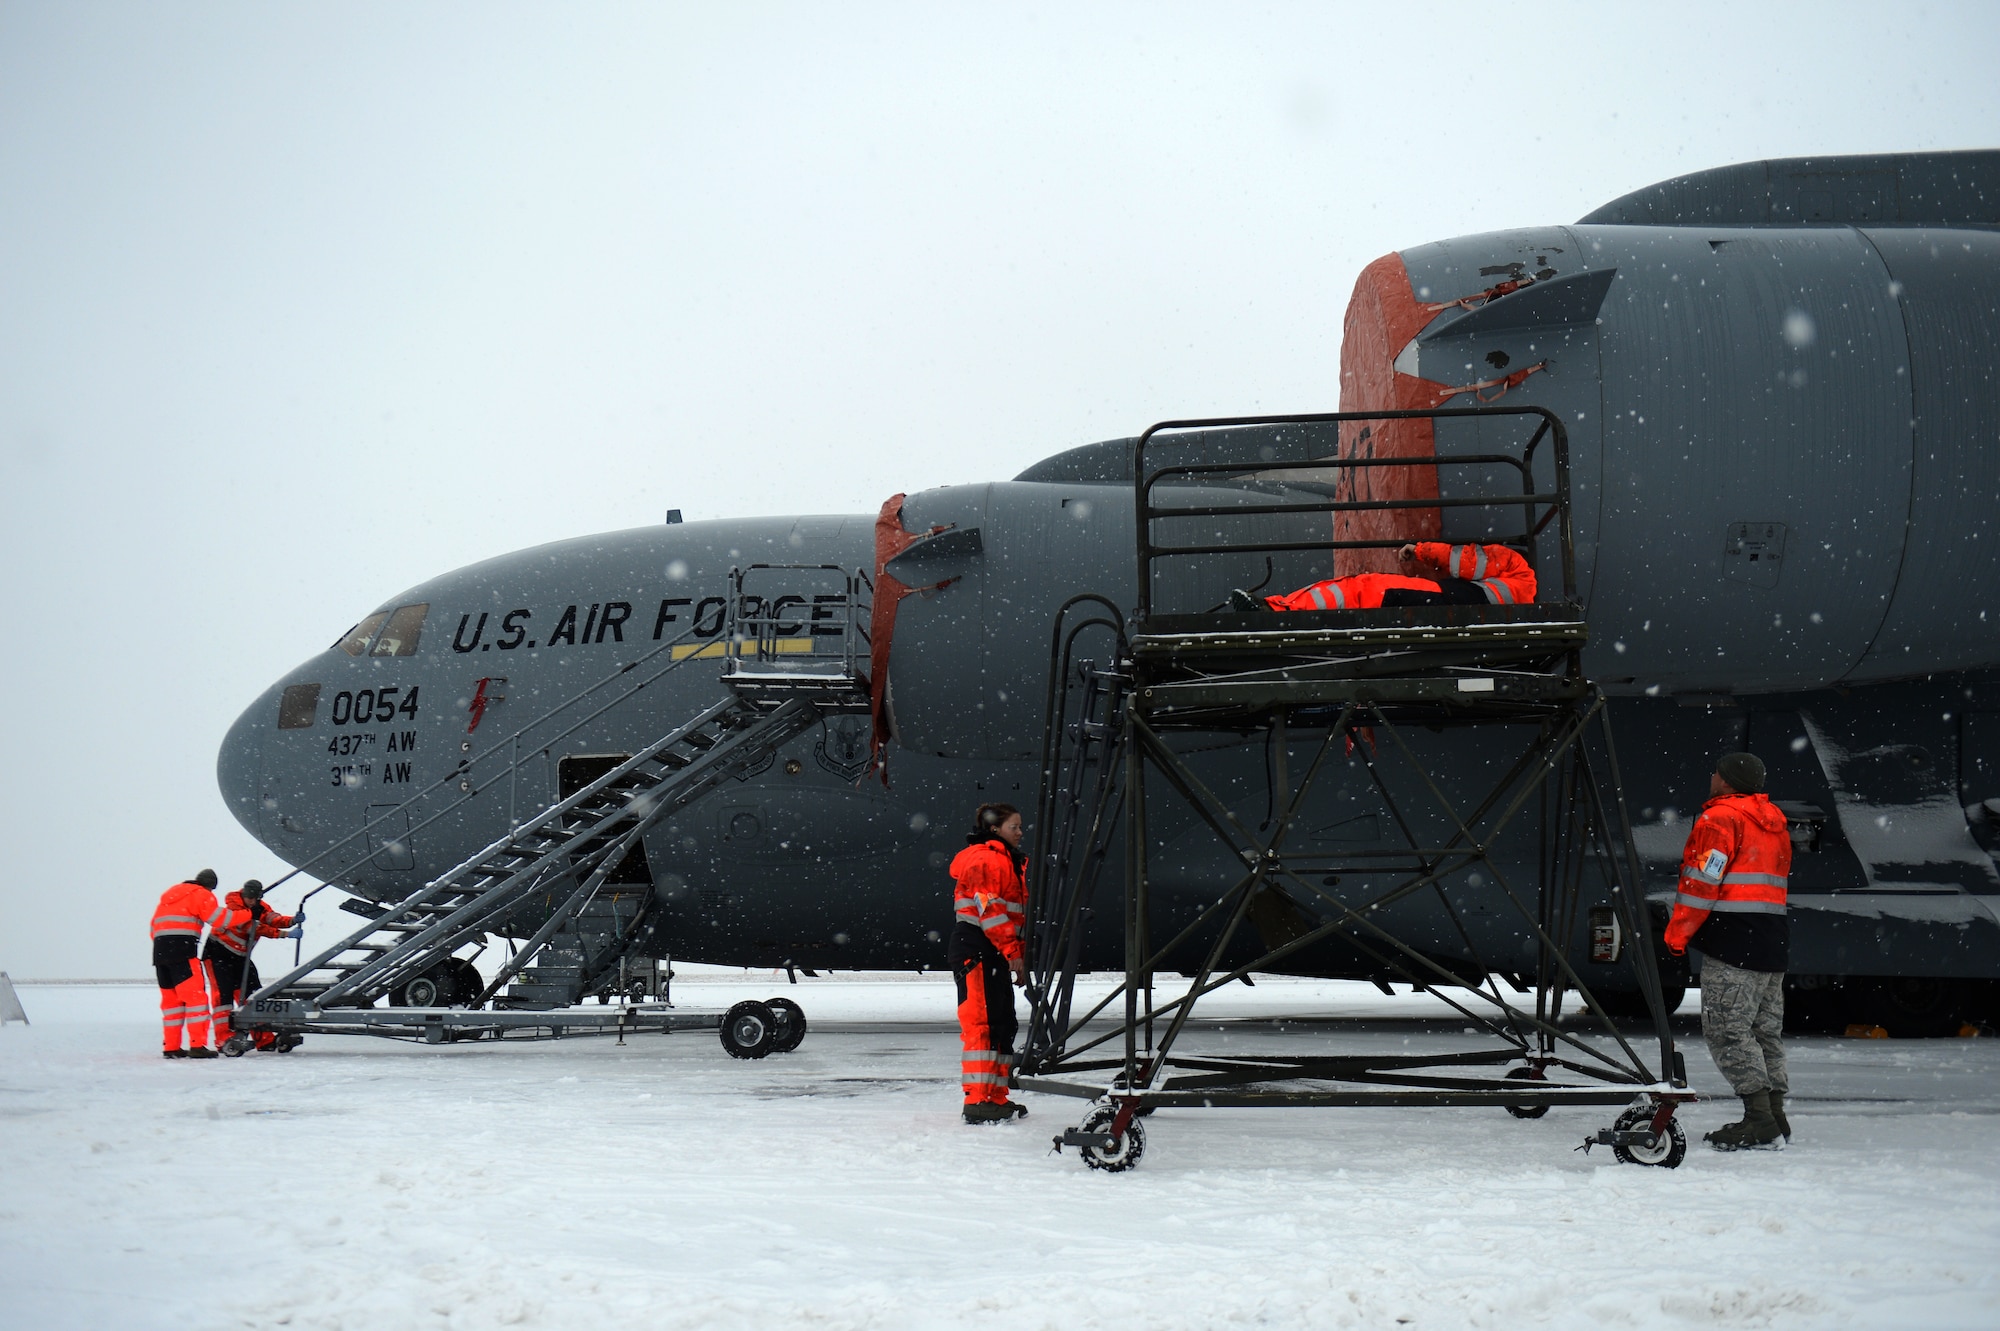 SPANGDAHLEM AIR BASE, Germany – Airmen from the 726th Air Mobility Squadron secure engine covers on a C-17 Globemaster III cargo aircraft Jan. 15, 2013. The covers are secured by six pins and then tightened to reduce the effects of extreme weather conditions on an engine at rest. (U.S. Air Force photo by Airman 1st Class Gustavo Castillo/Released)